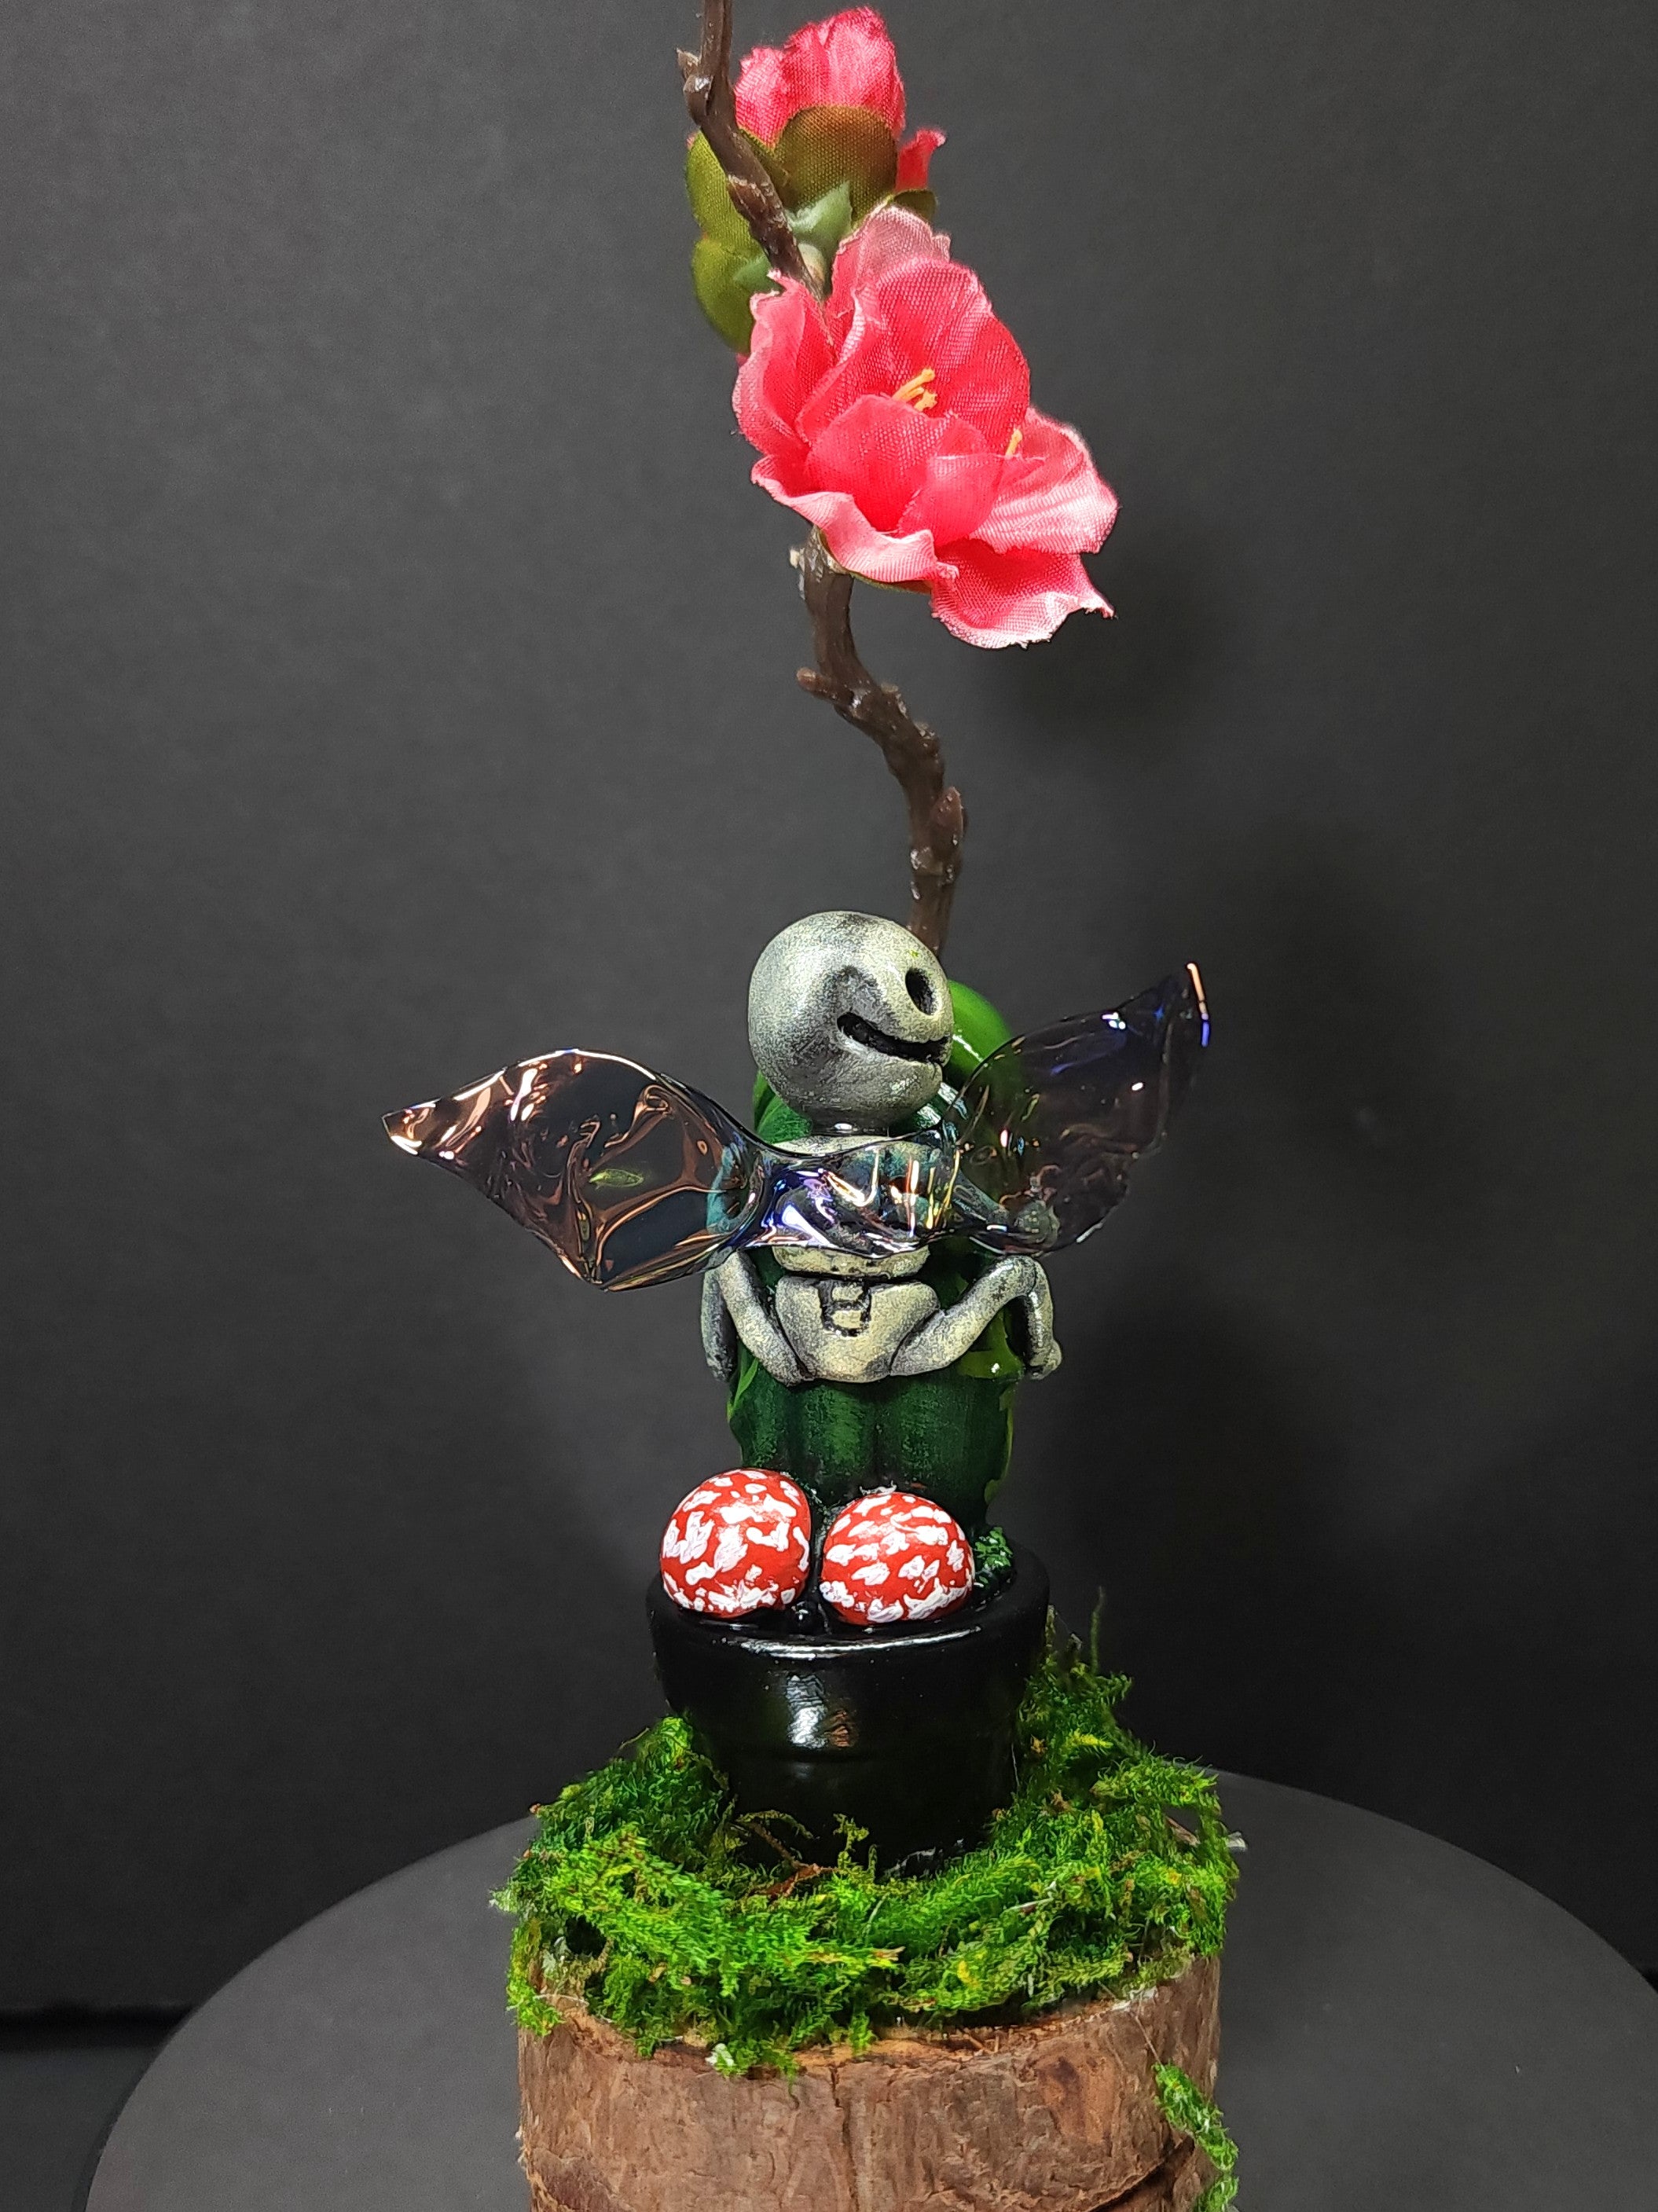 Polymer clay statue of fairy on flowerpot with flower and mossy plant on stump.